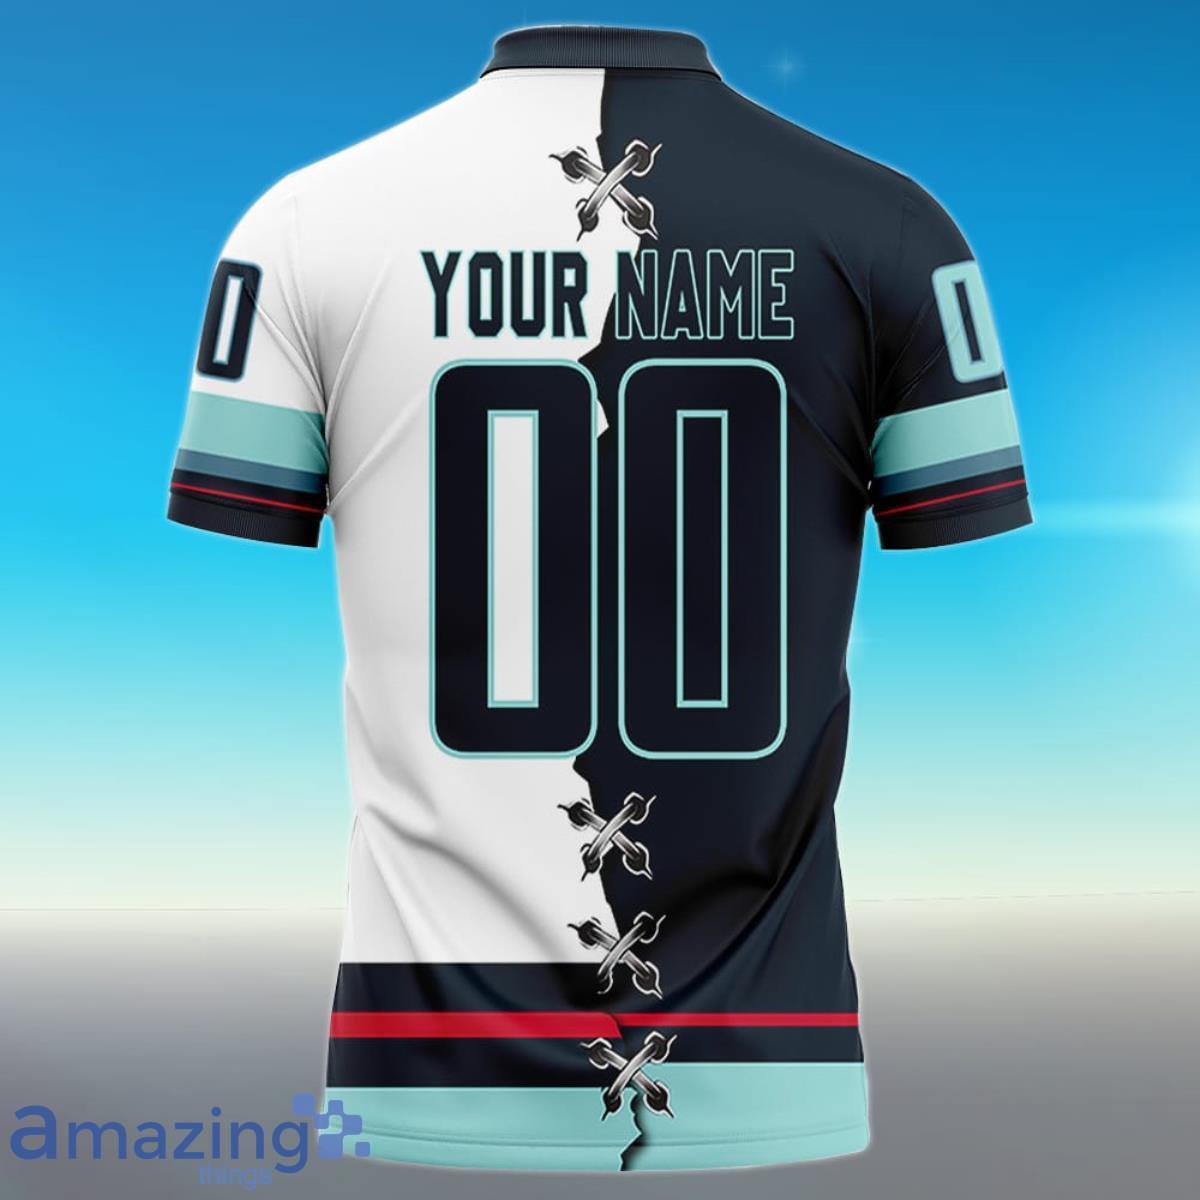 Kraken Hockey Jersey Customized With Your Name and Number 